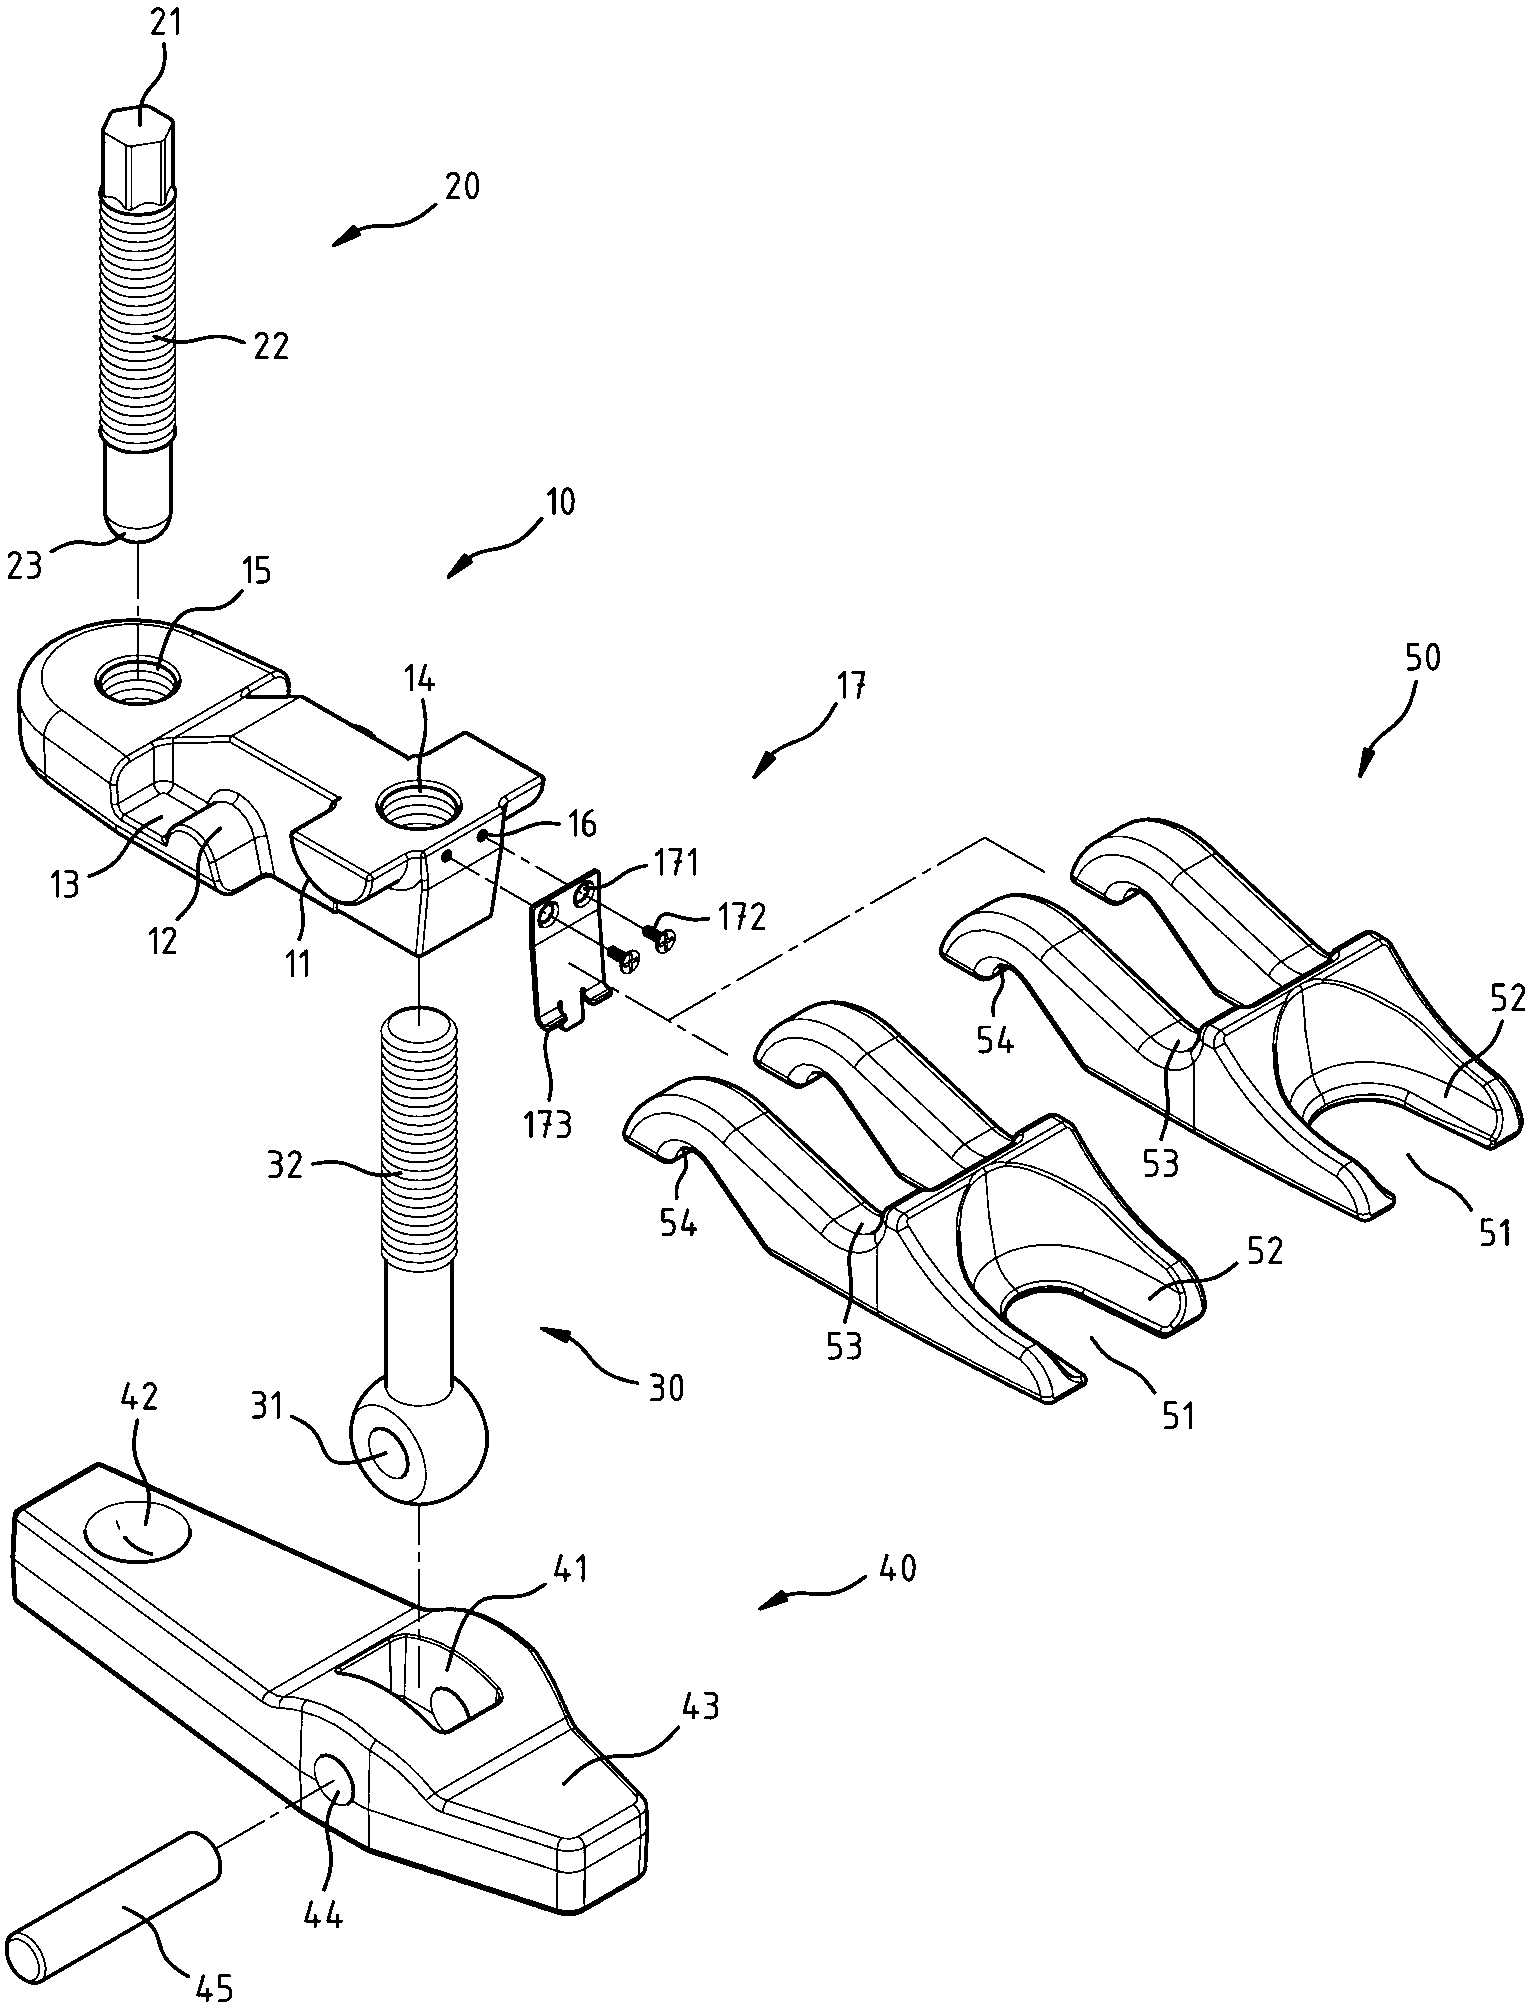 Replaceable removal tool structure